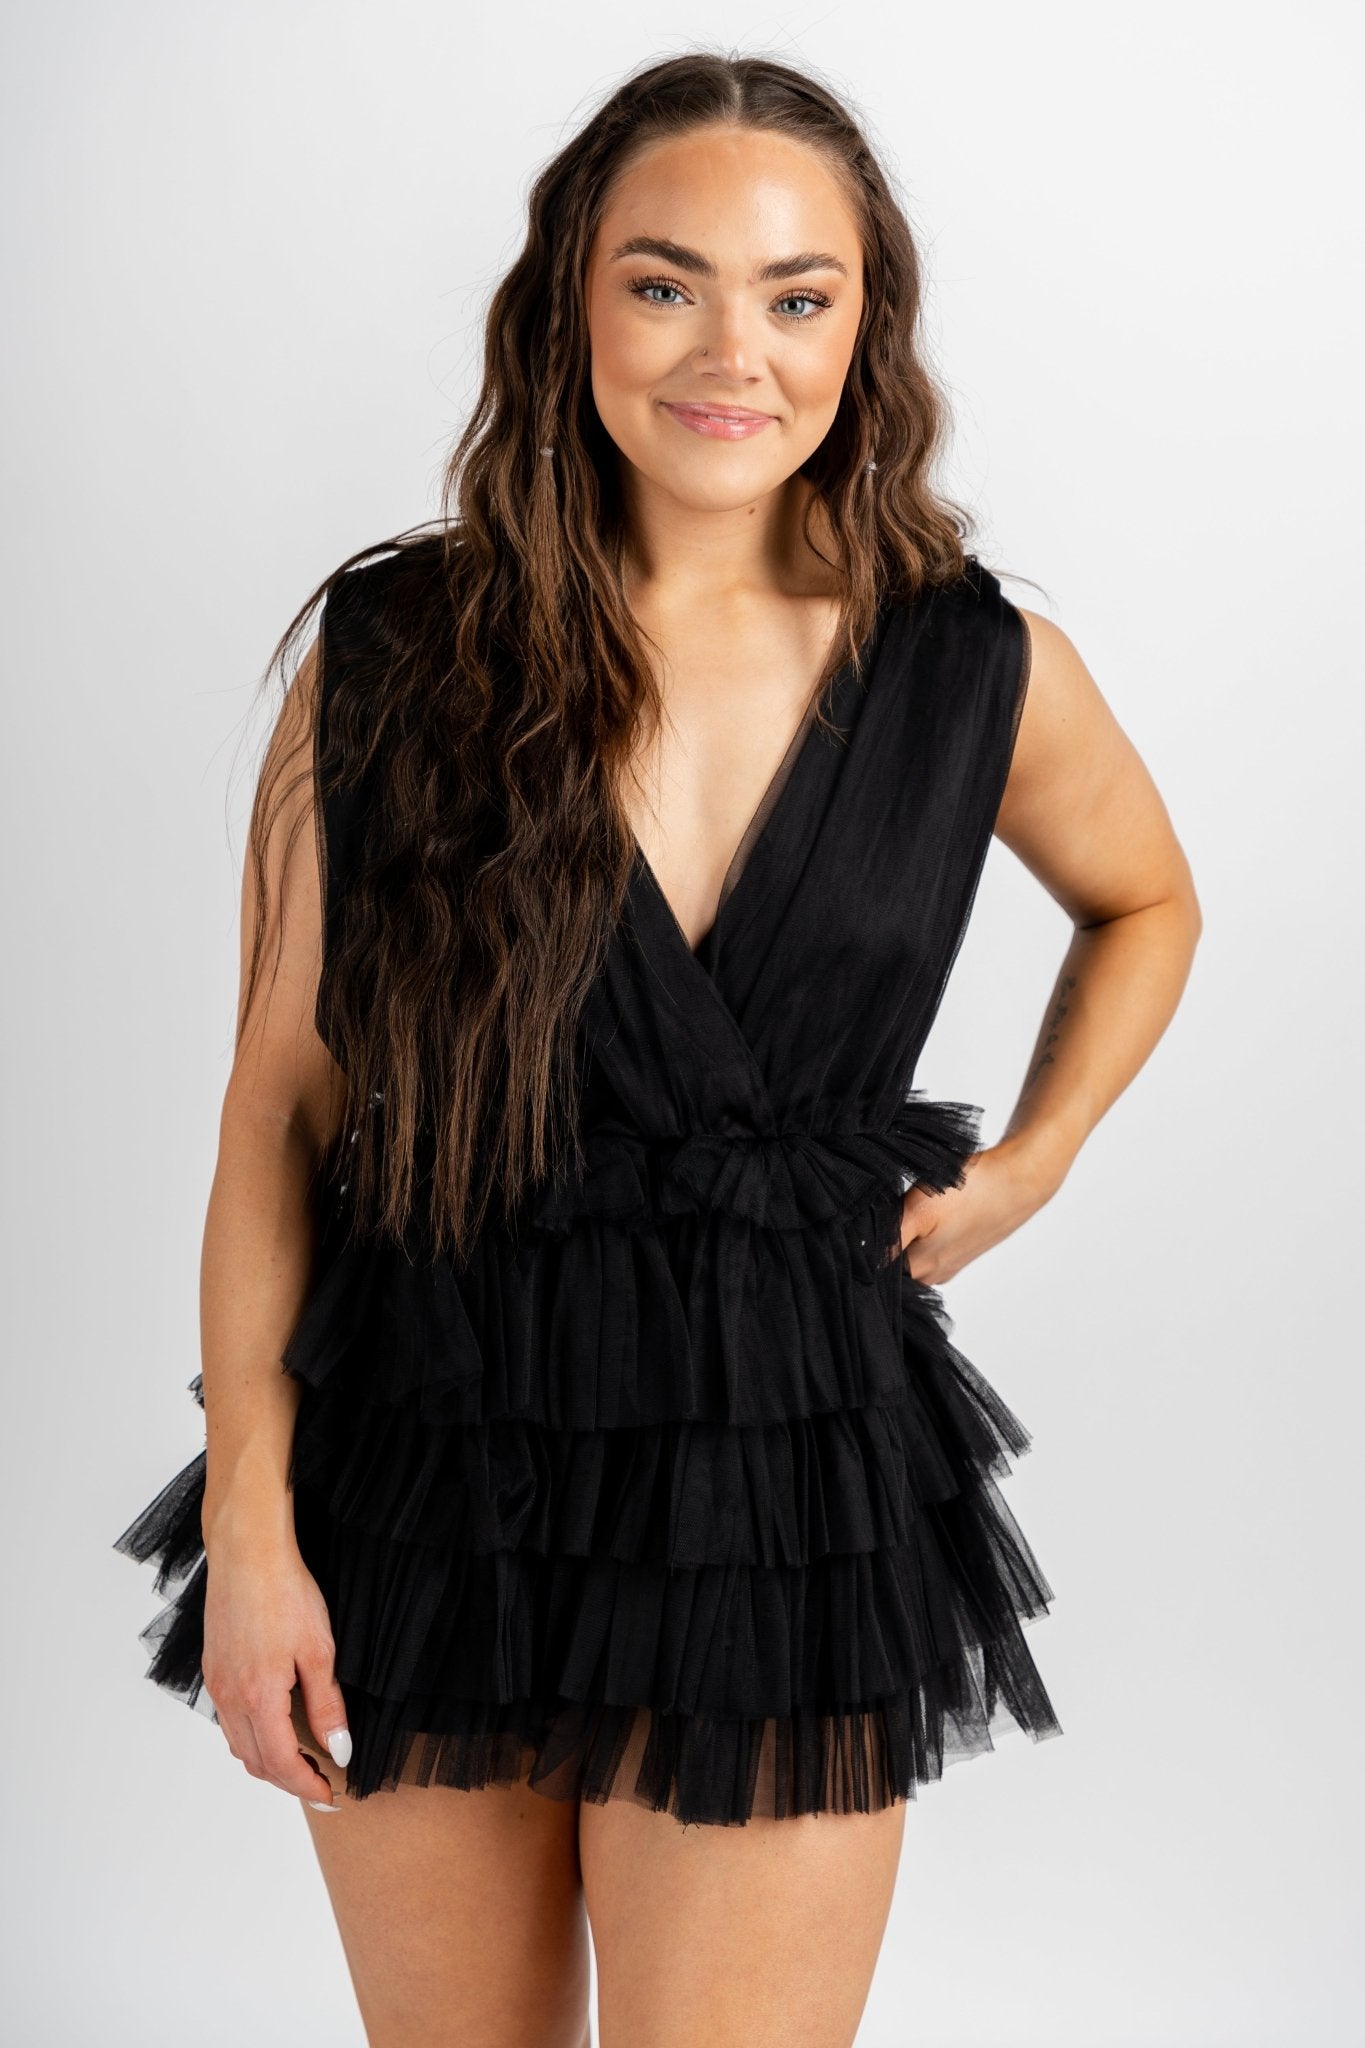 Tulle deep v romper black - Affordable Romper - Boutique Rompers & Pantsuits at Lush Fashion Lounge Boutique in Oklahoma City